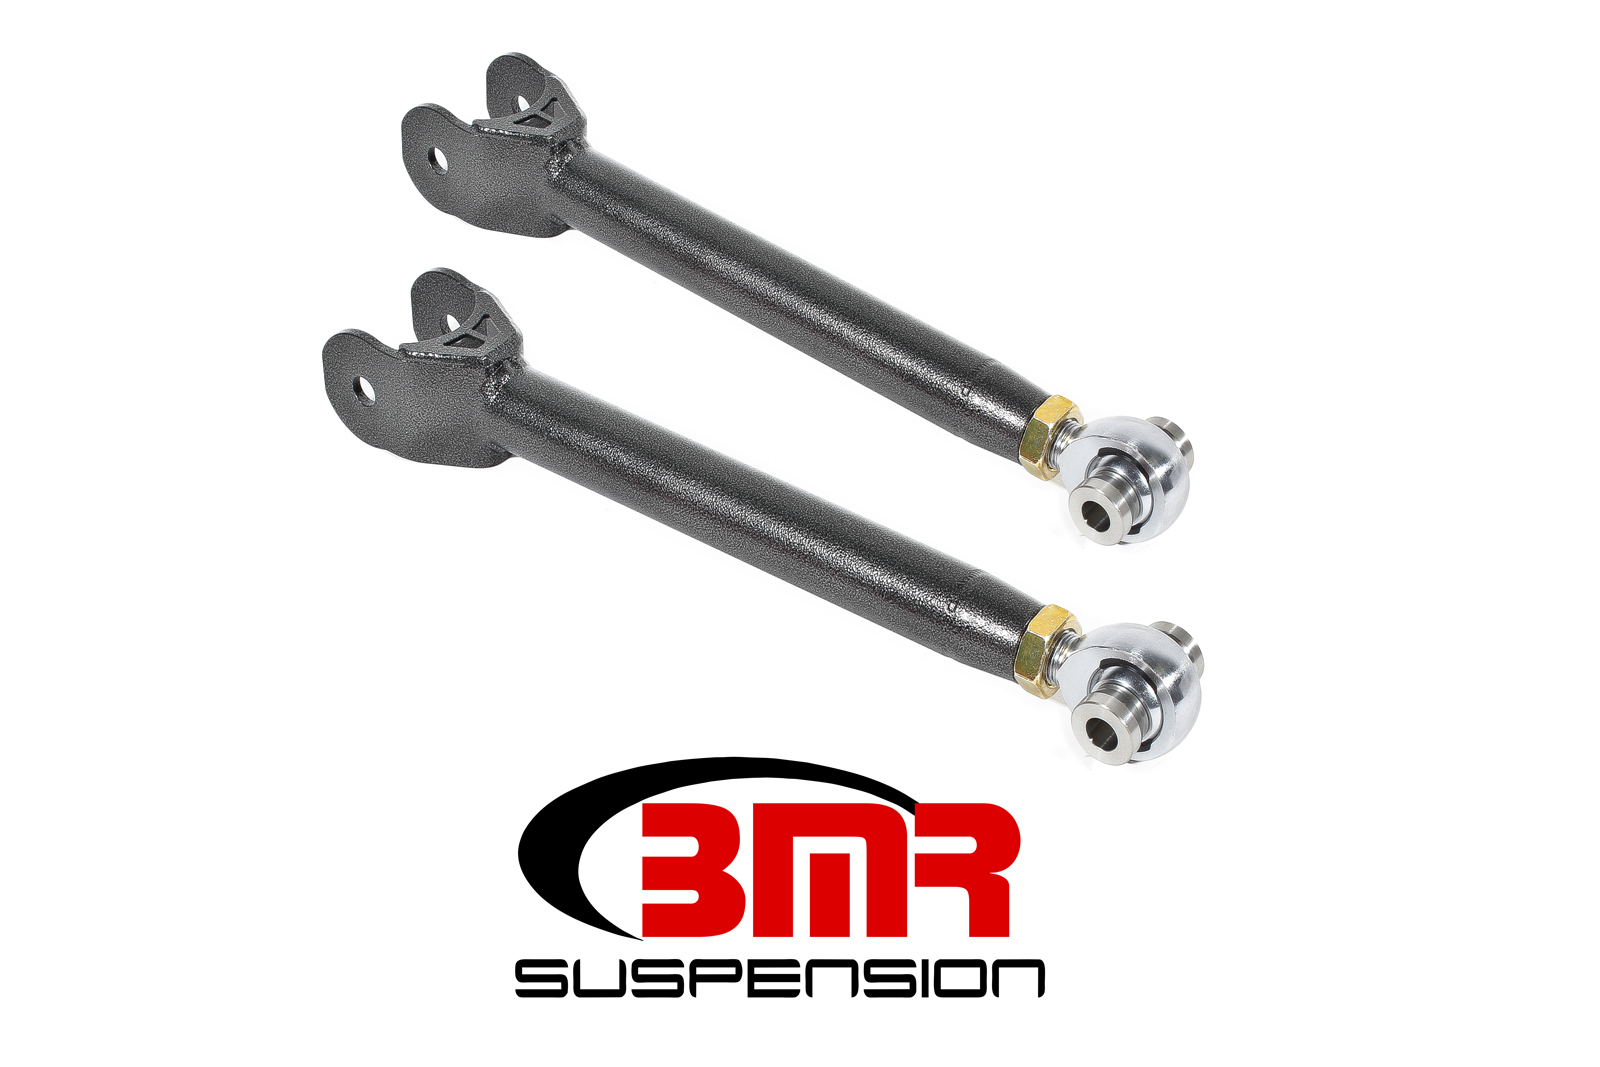 Lower Trailing Arms, Single Adjustable, Rod Ends, Fits all 2016-newer Chevrolet Camaros , BMR Suspension - TCA060H